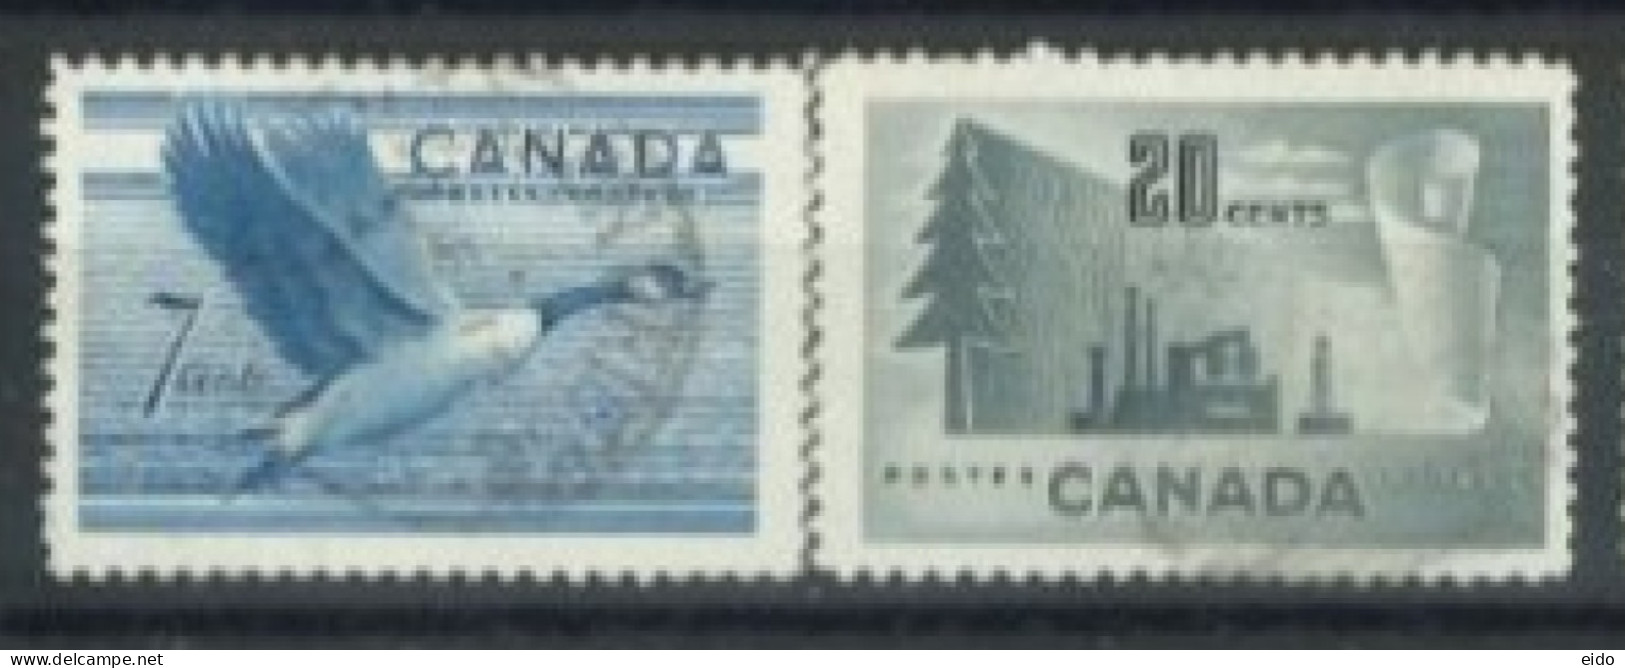 CANADA - 1951/52, CANADIAN GOOSE & FORESTY PRODUCTS STAMPS SET OF 2, USED. - Gebraucht